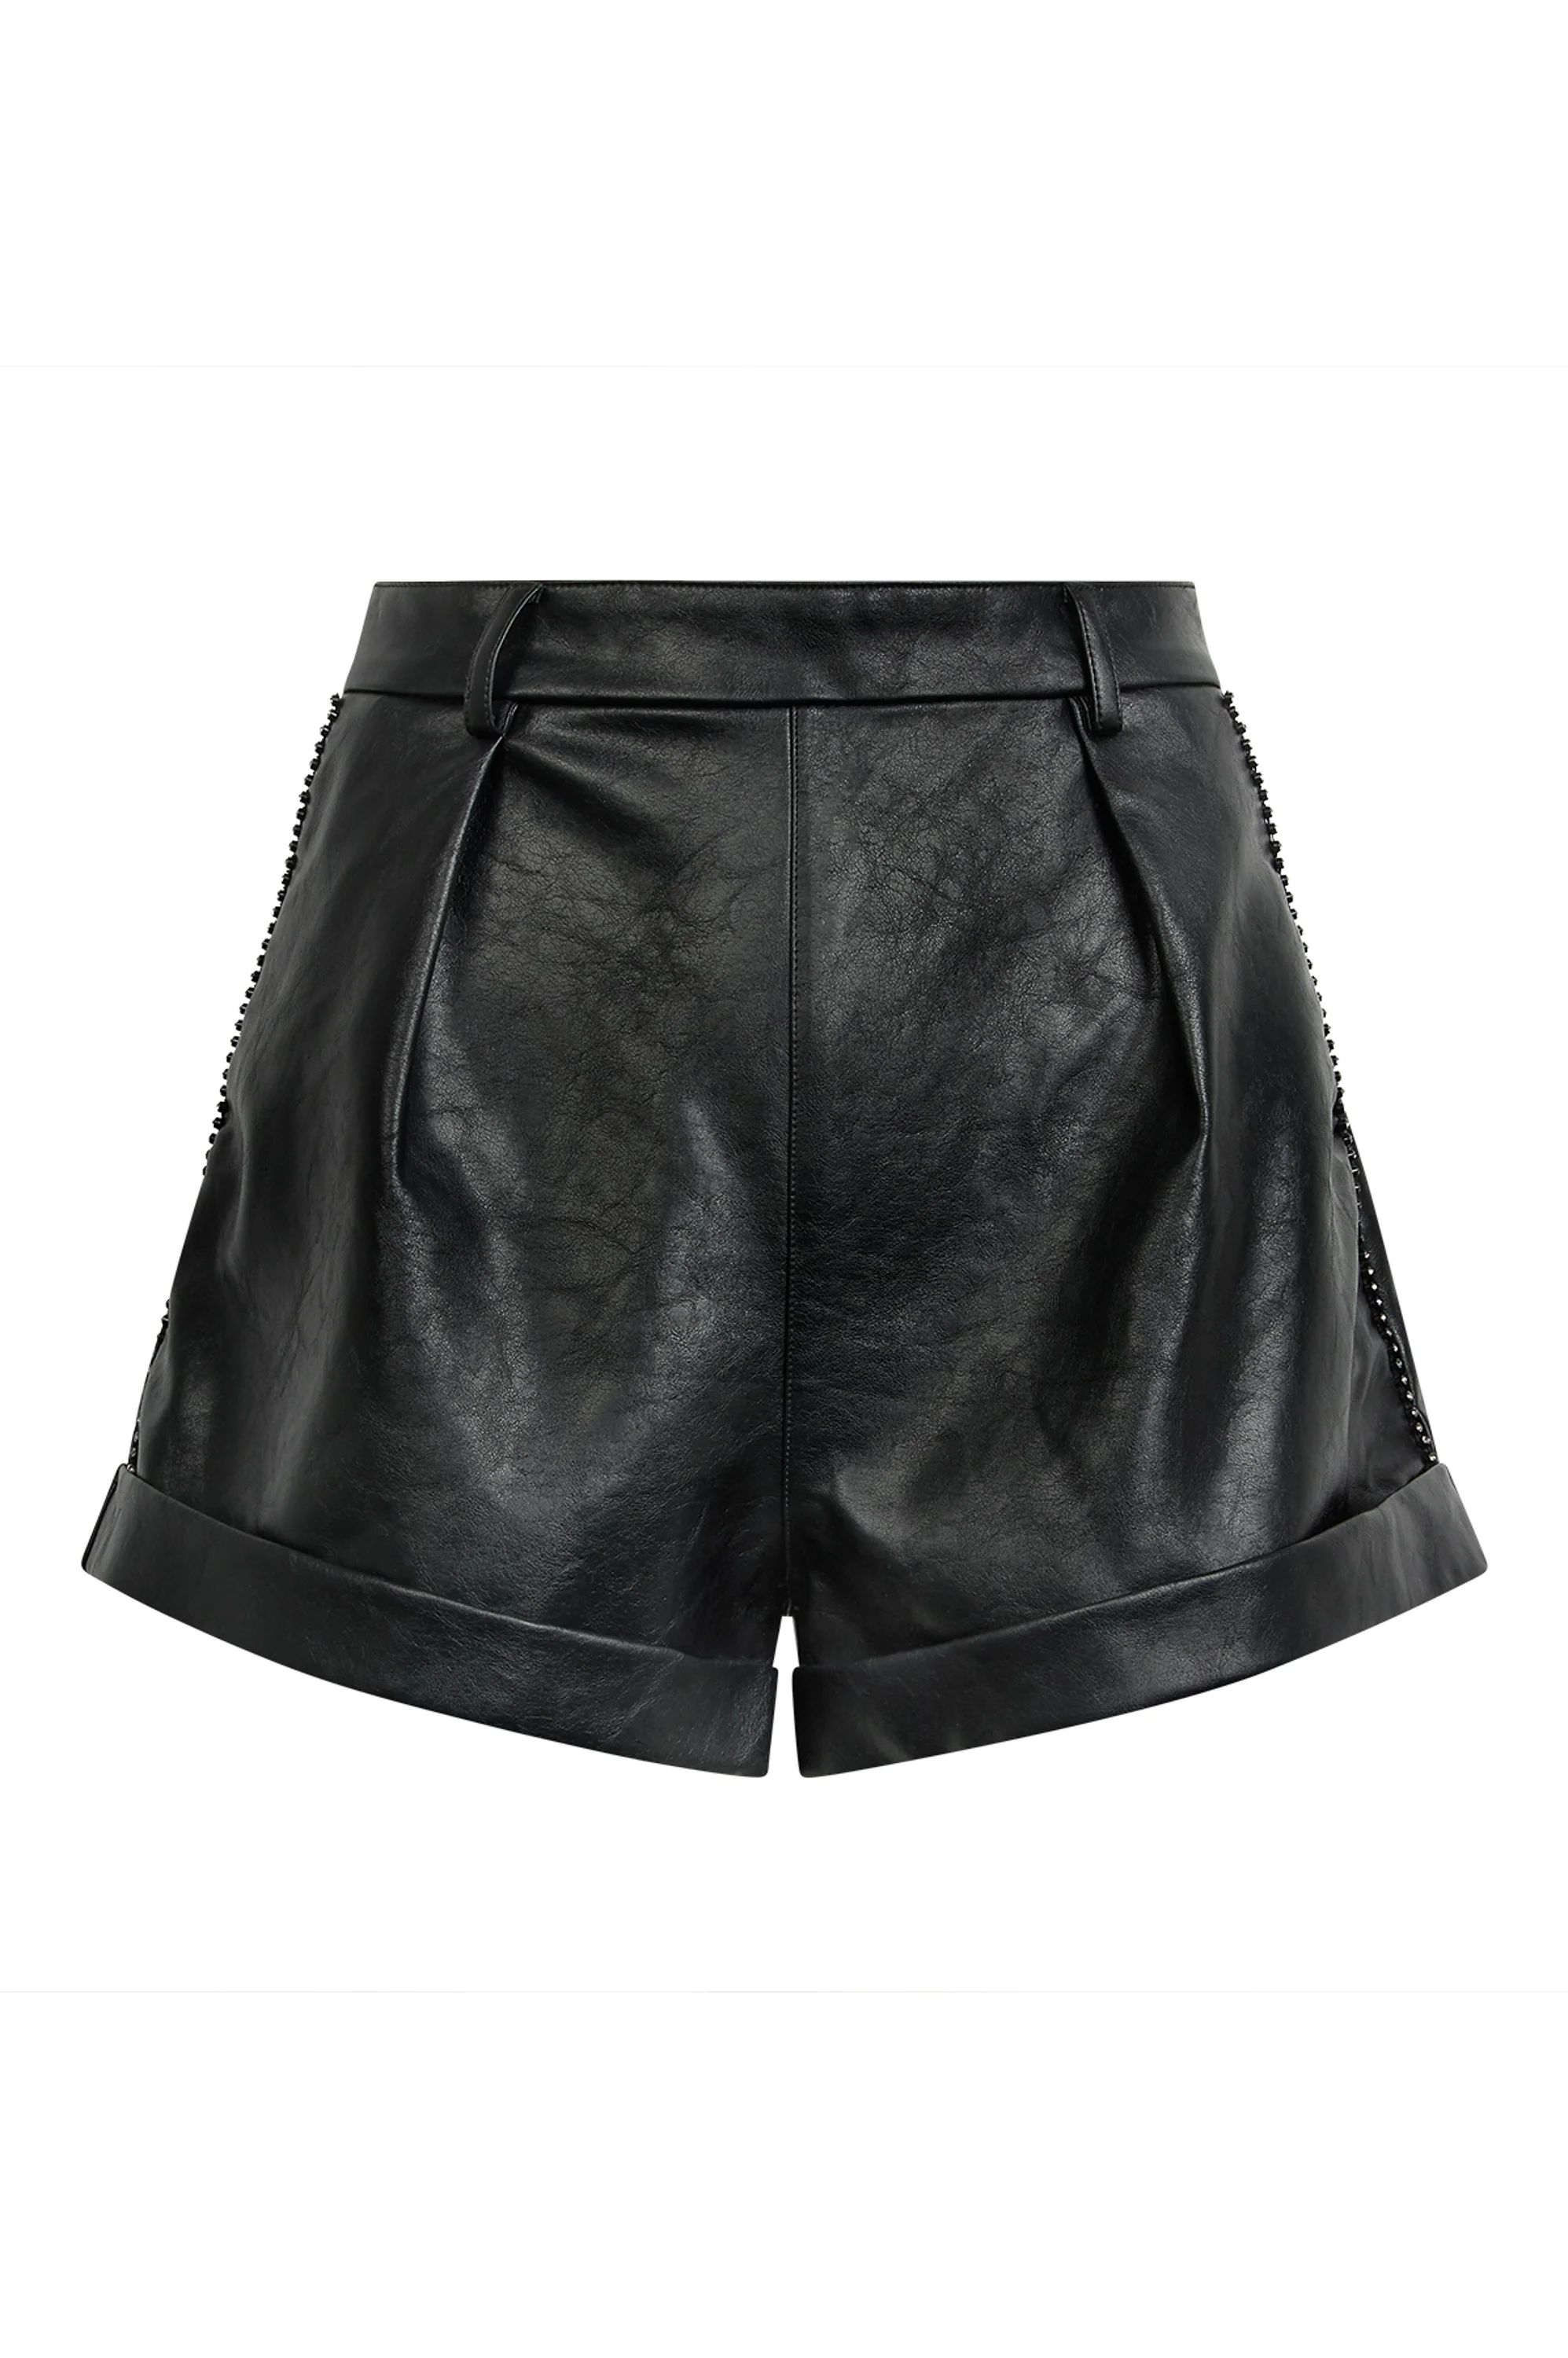 LORENZA Black Diamante PU Leather Shorts | Noughts and Kisses